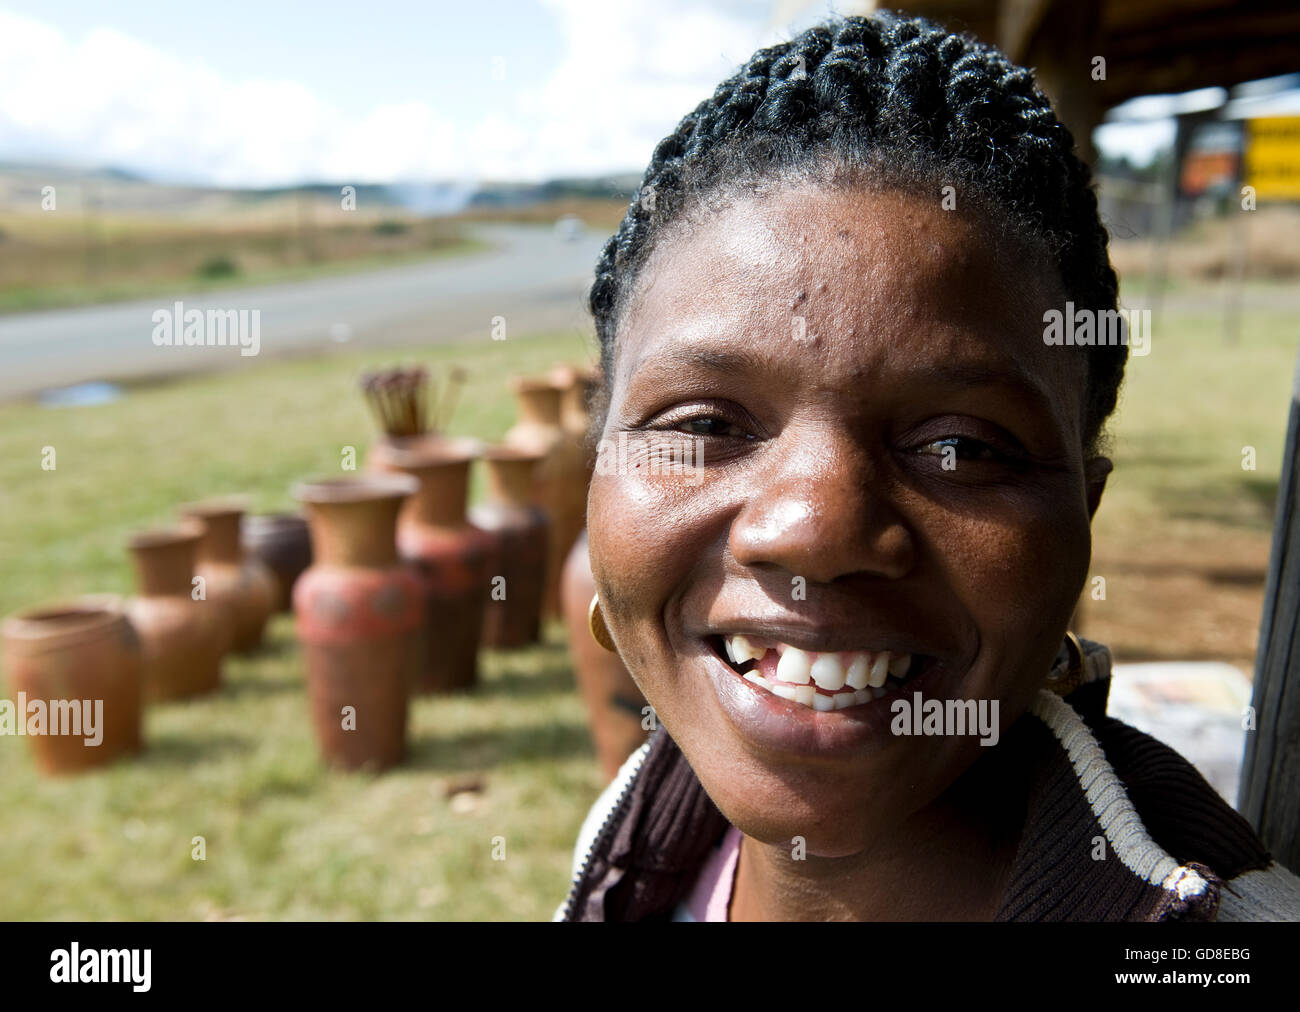 Portrait of a happy working African woman with beautifully threaded hair selling handmade clay pottery on roadside in rural South Africa. Stock Photo